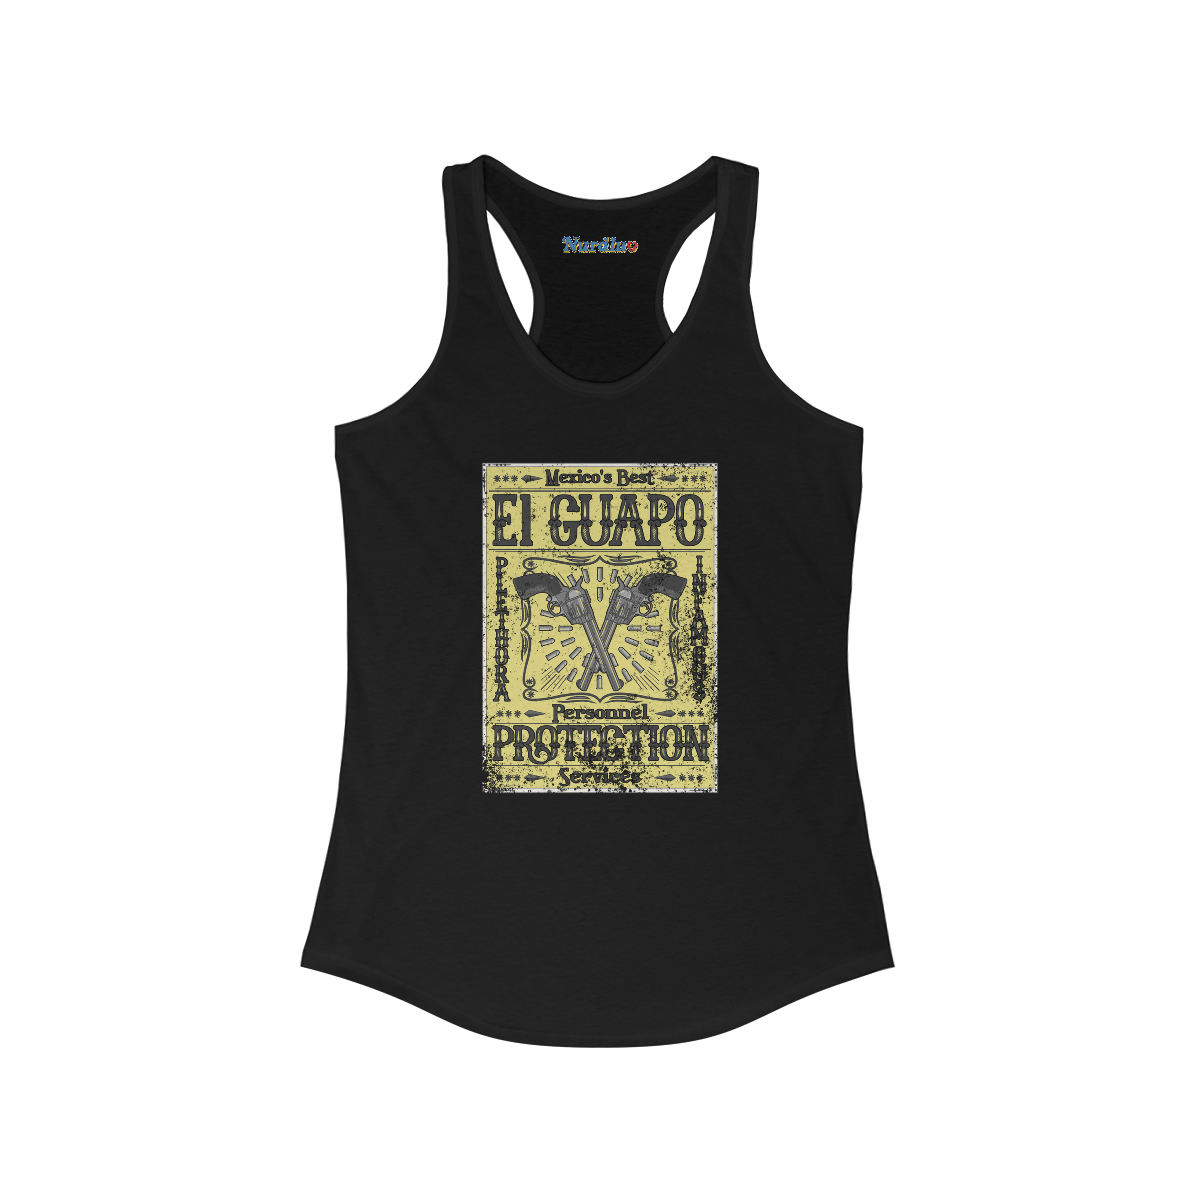 Personnel Protection (yellow) - Women's Ideal Racerback Tank